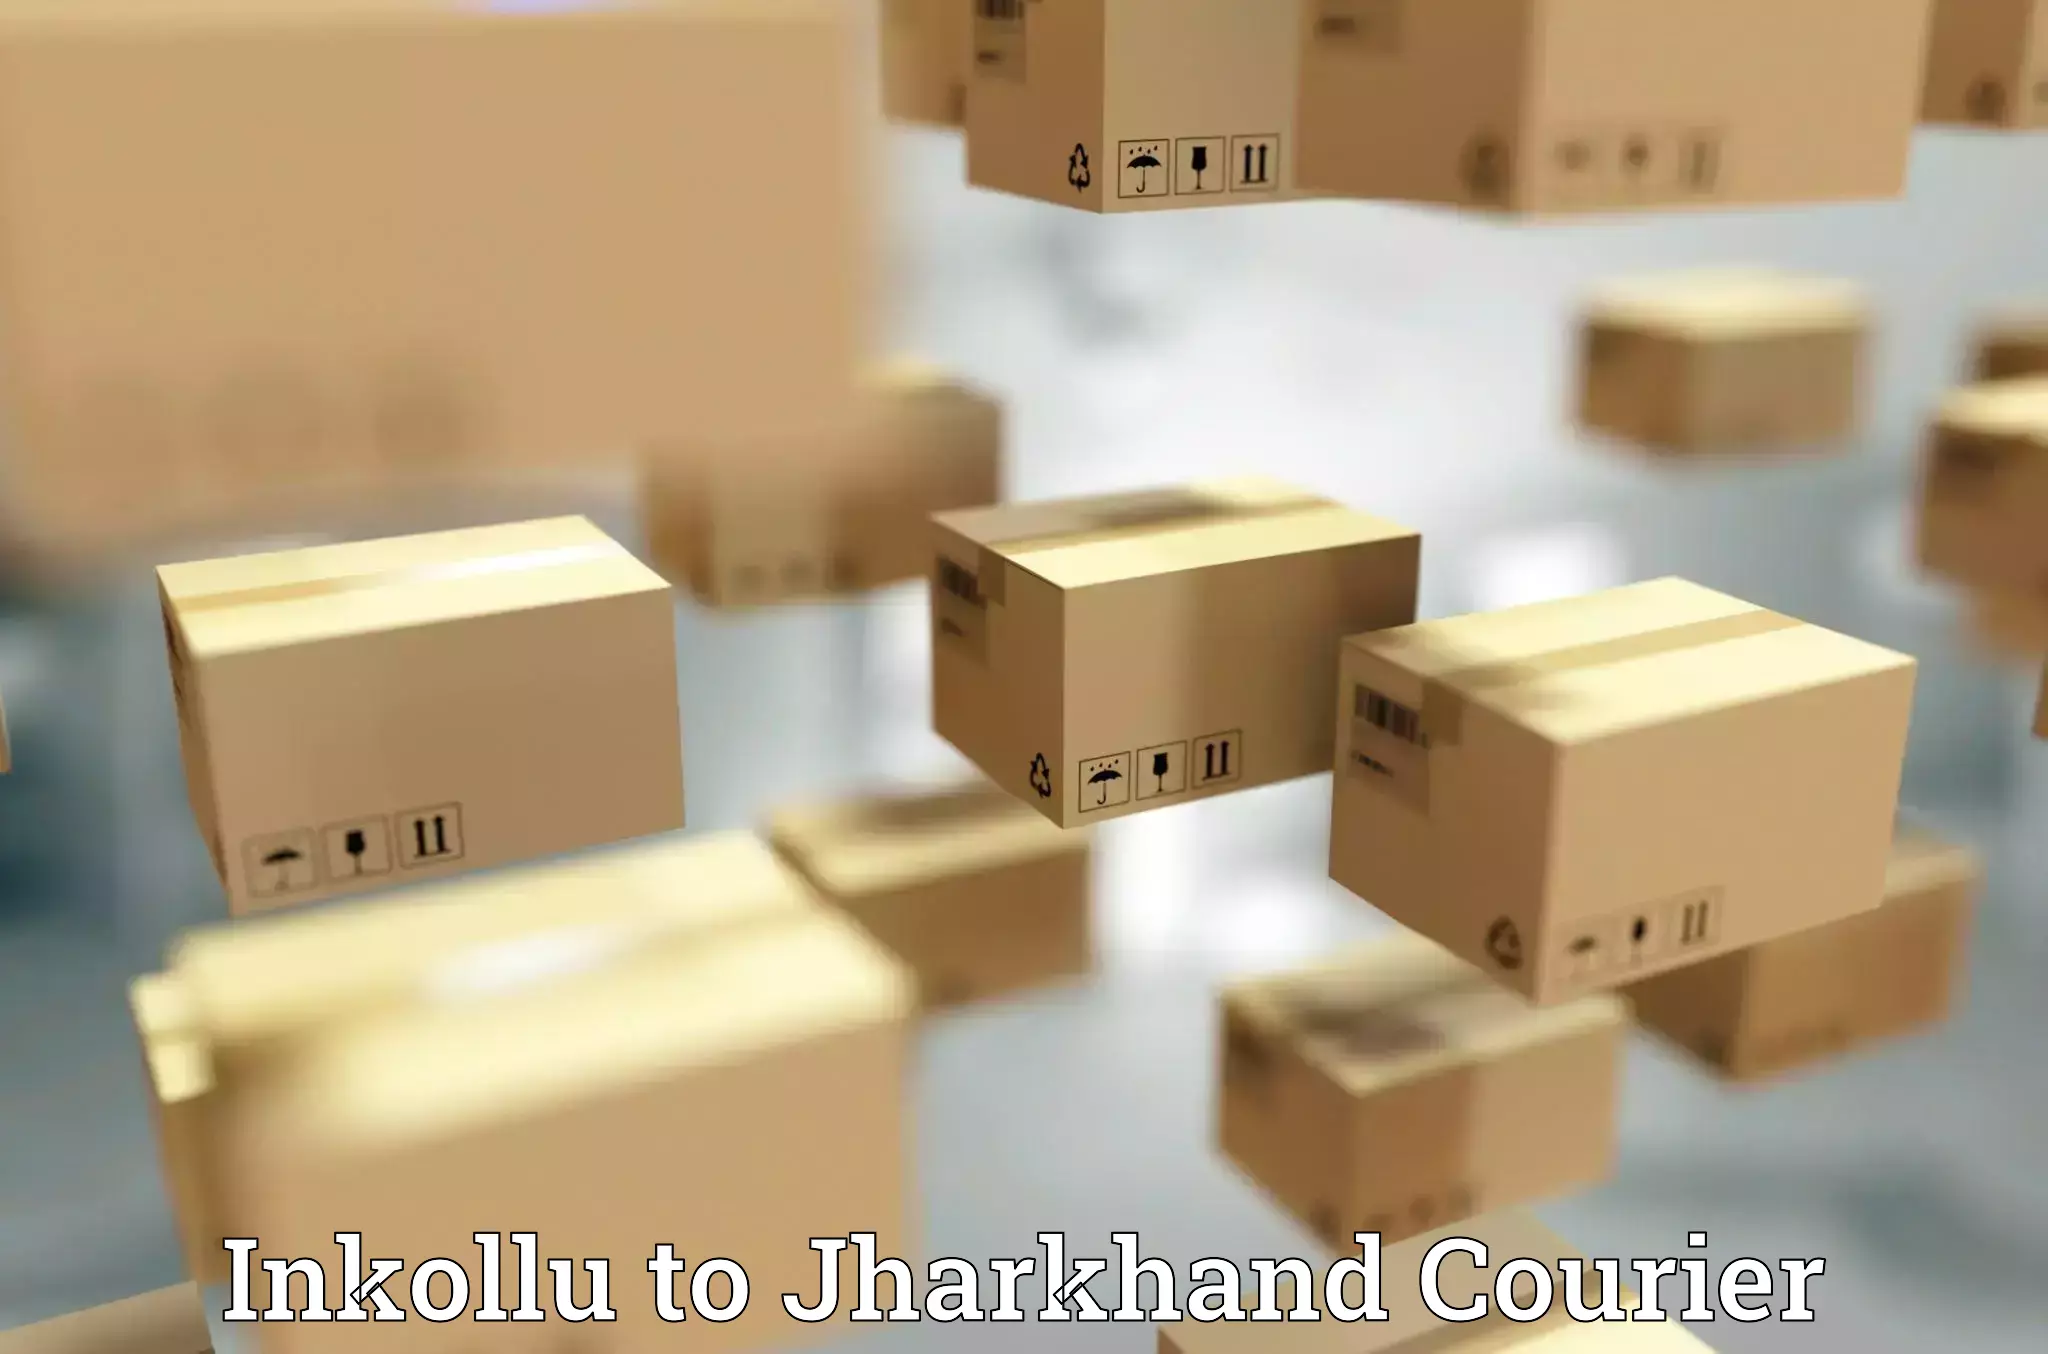 Multi-package shipping Inkollu to Jharkhand